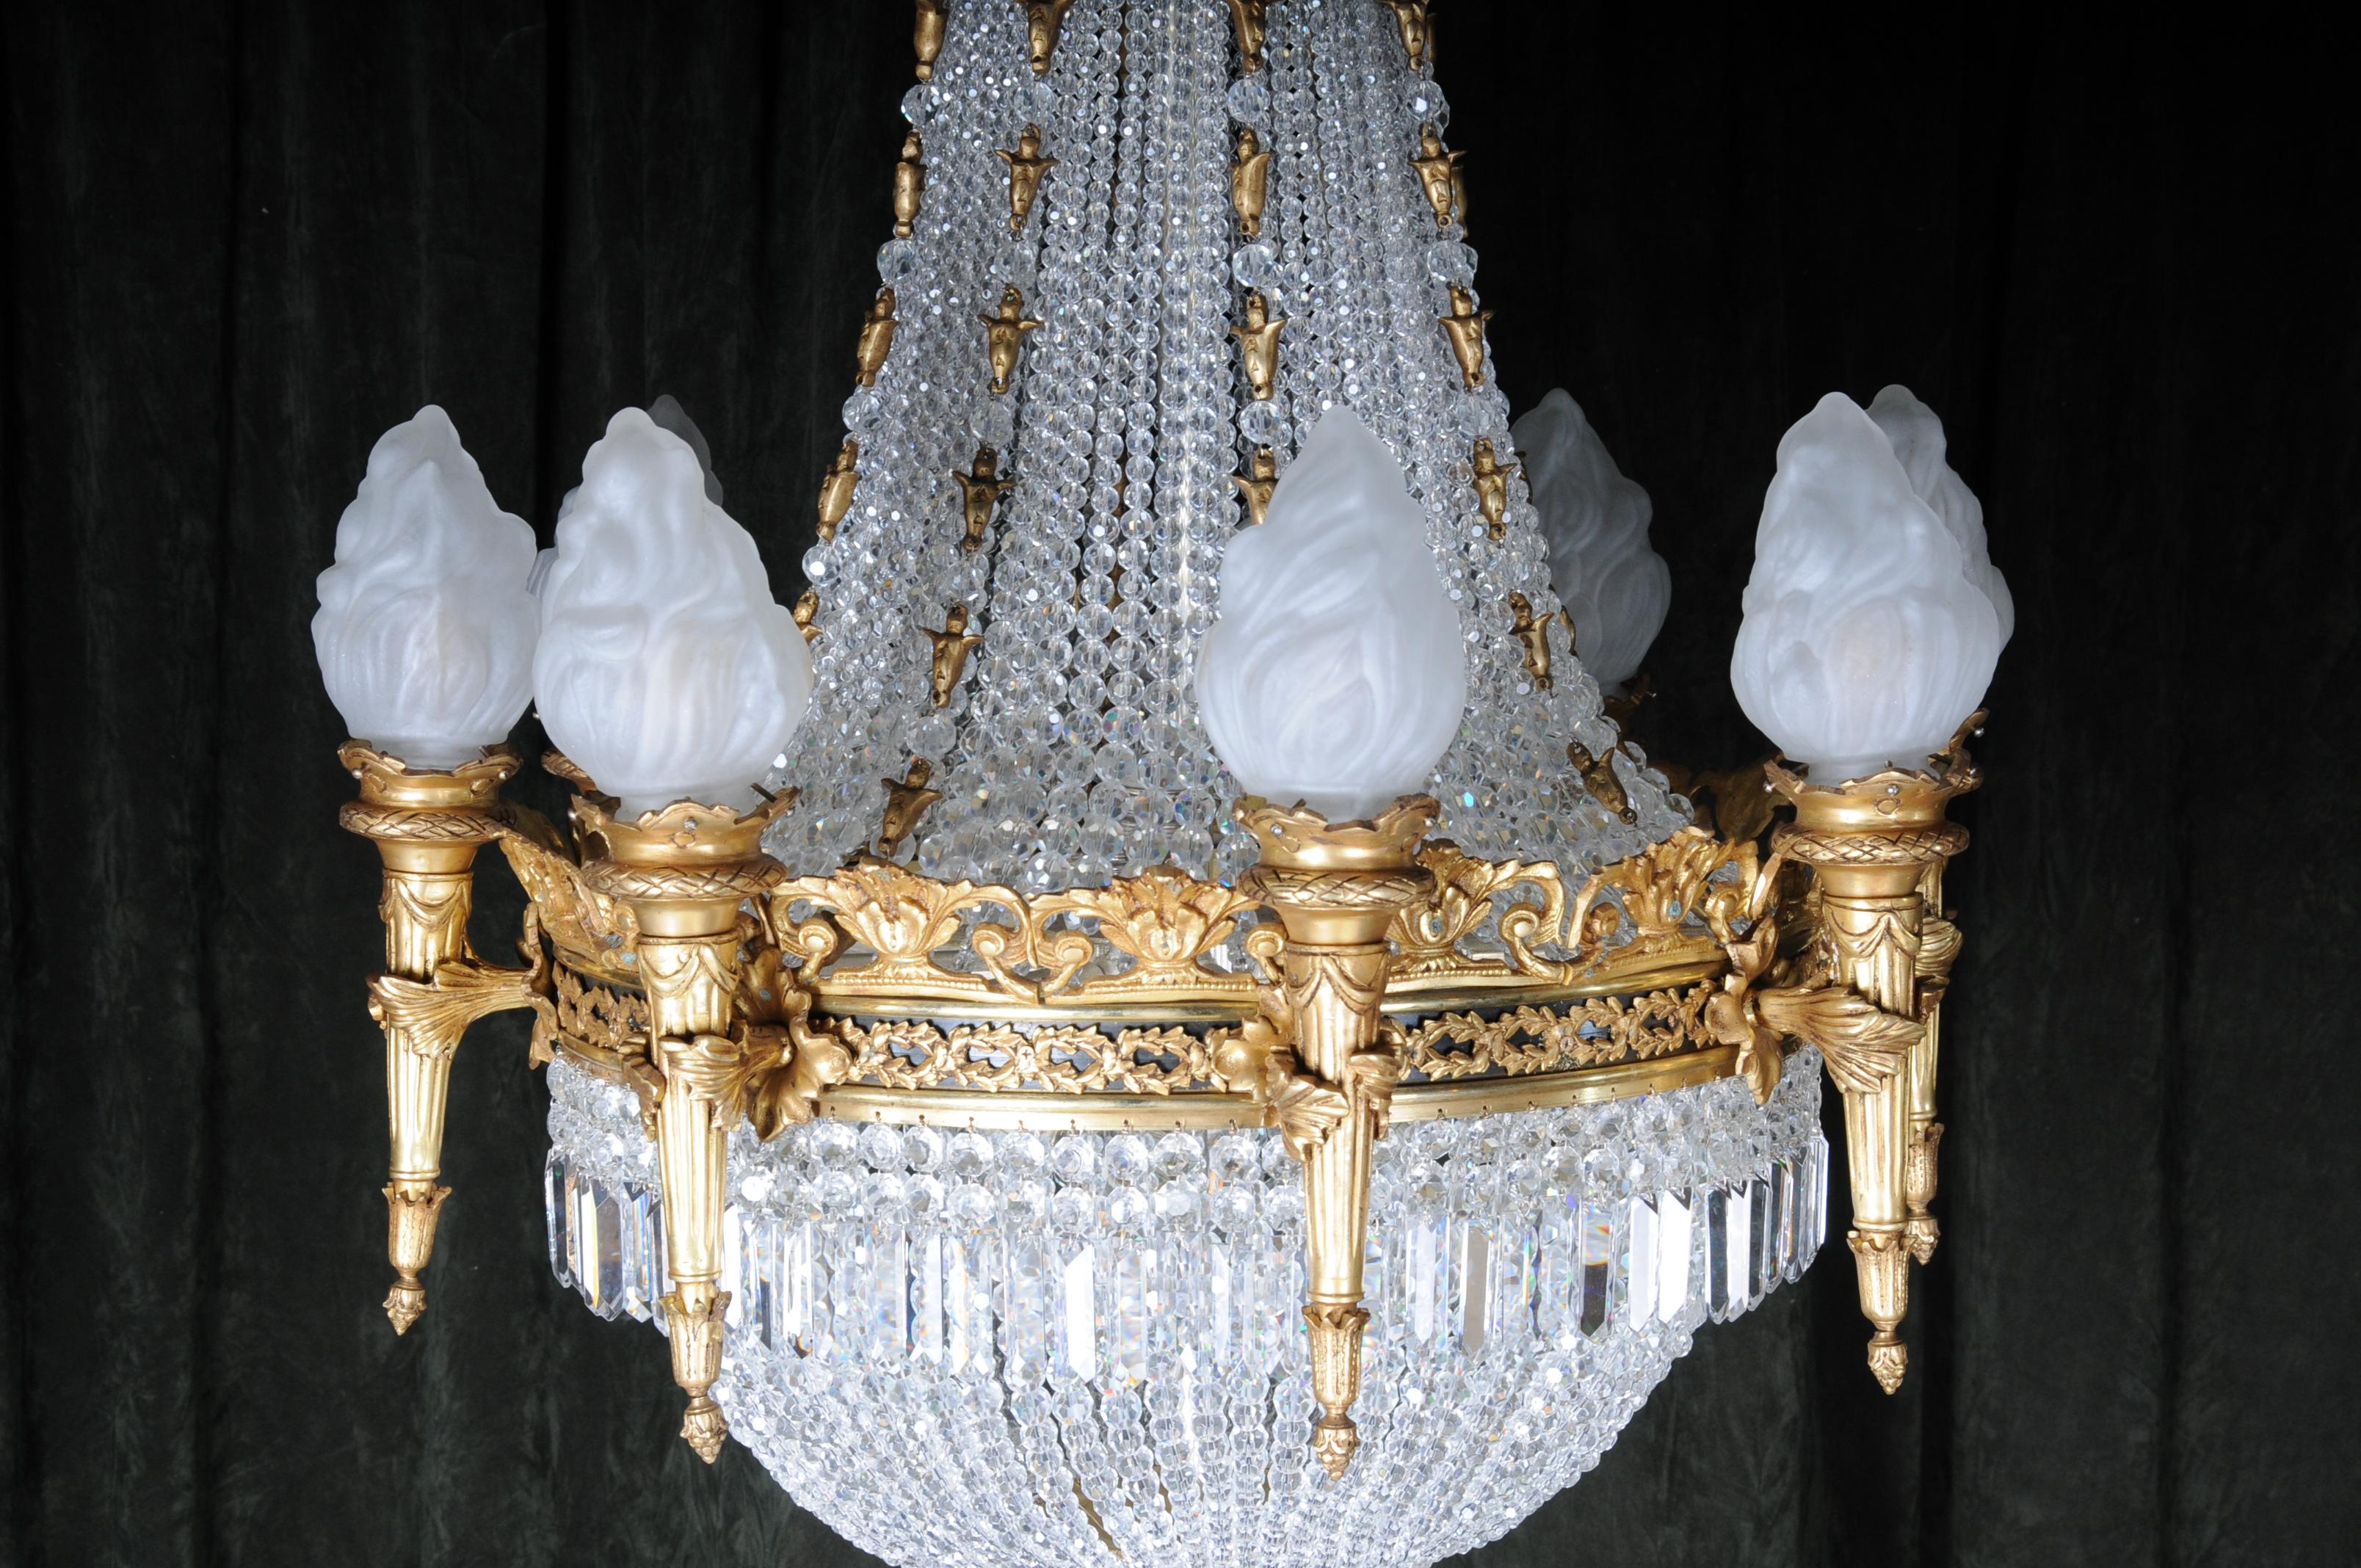 French Splendid Classicist Ceiling Candelabra/Chandelier Empire Style For Sale